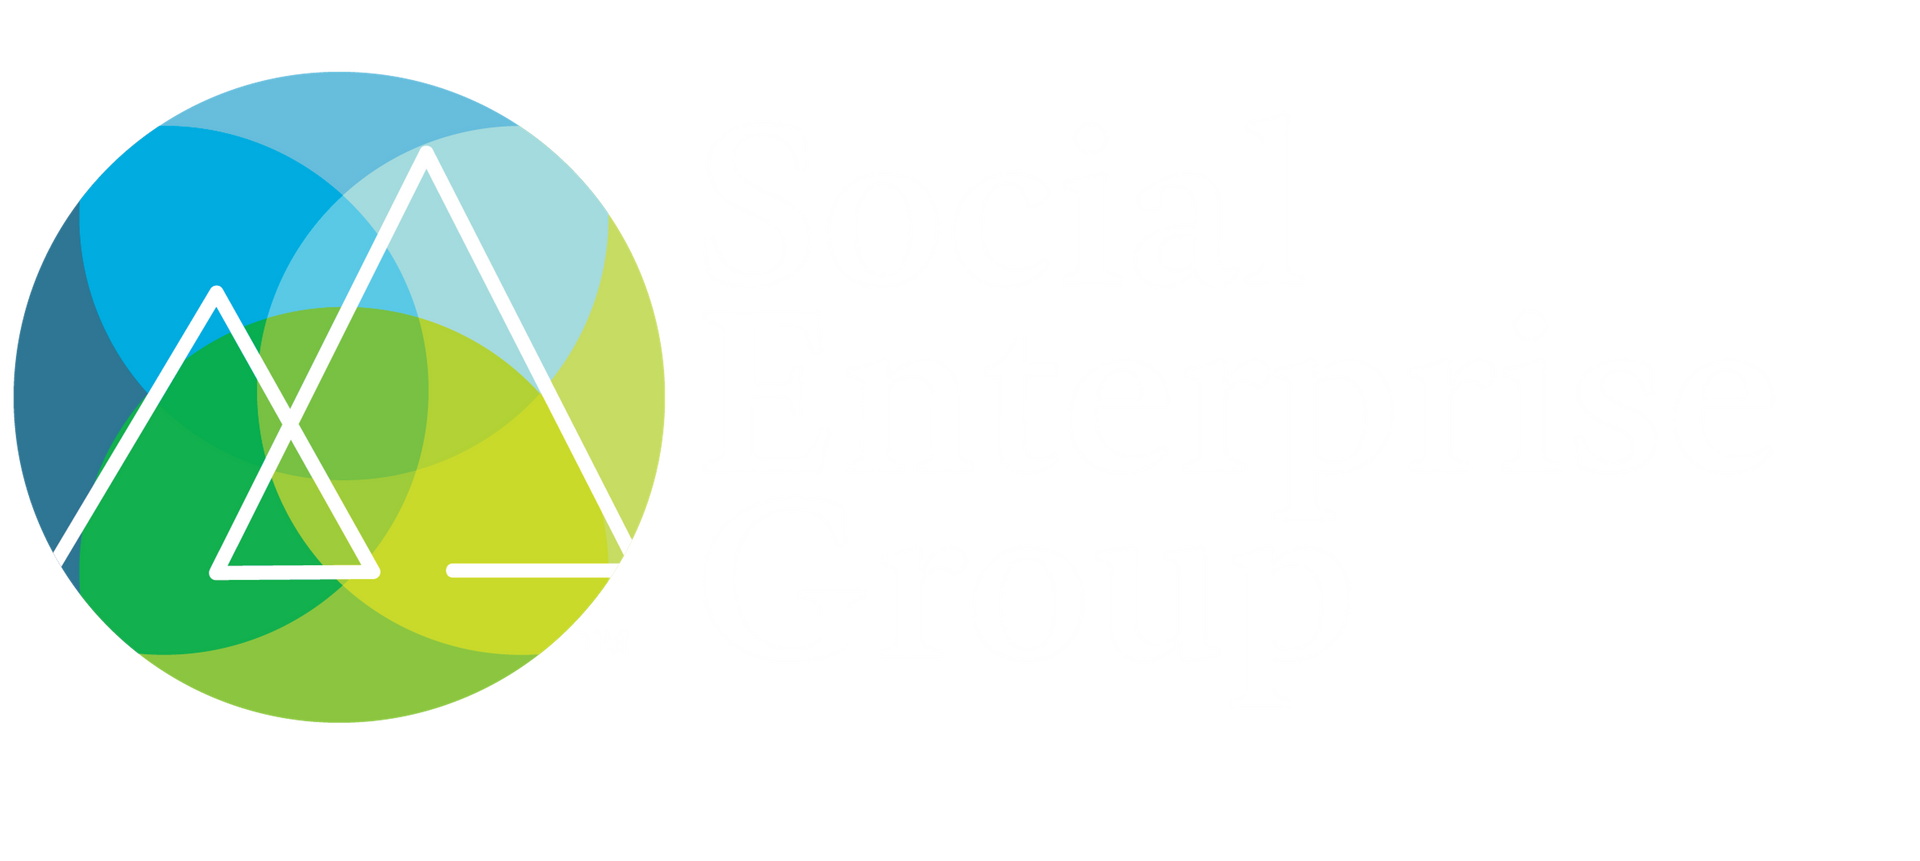 Social Enterprise Group – Helping Organizations Grow and Thrive